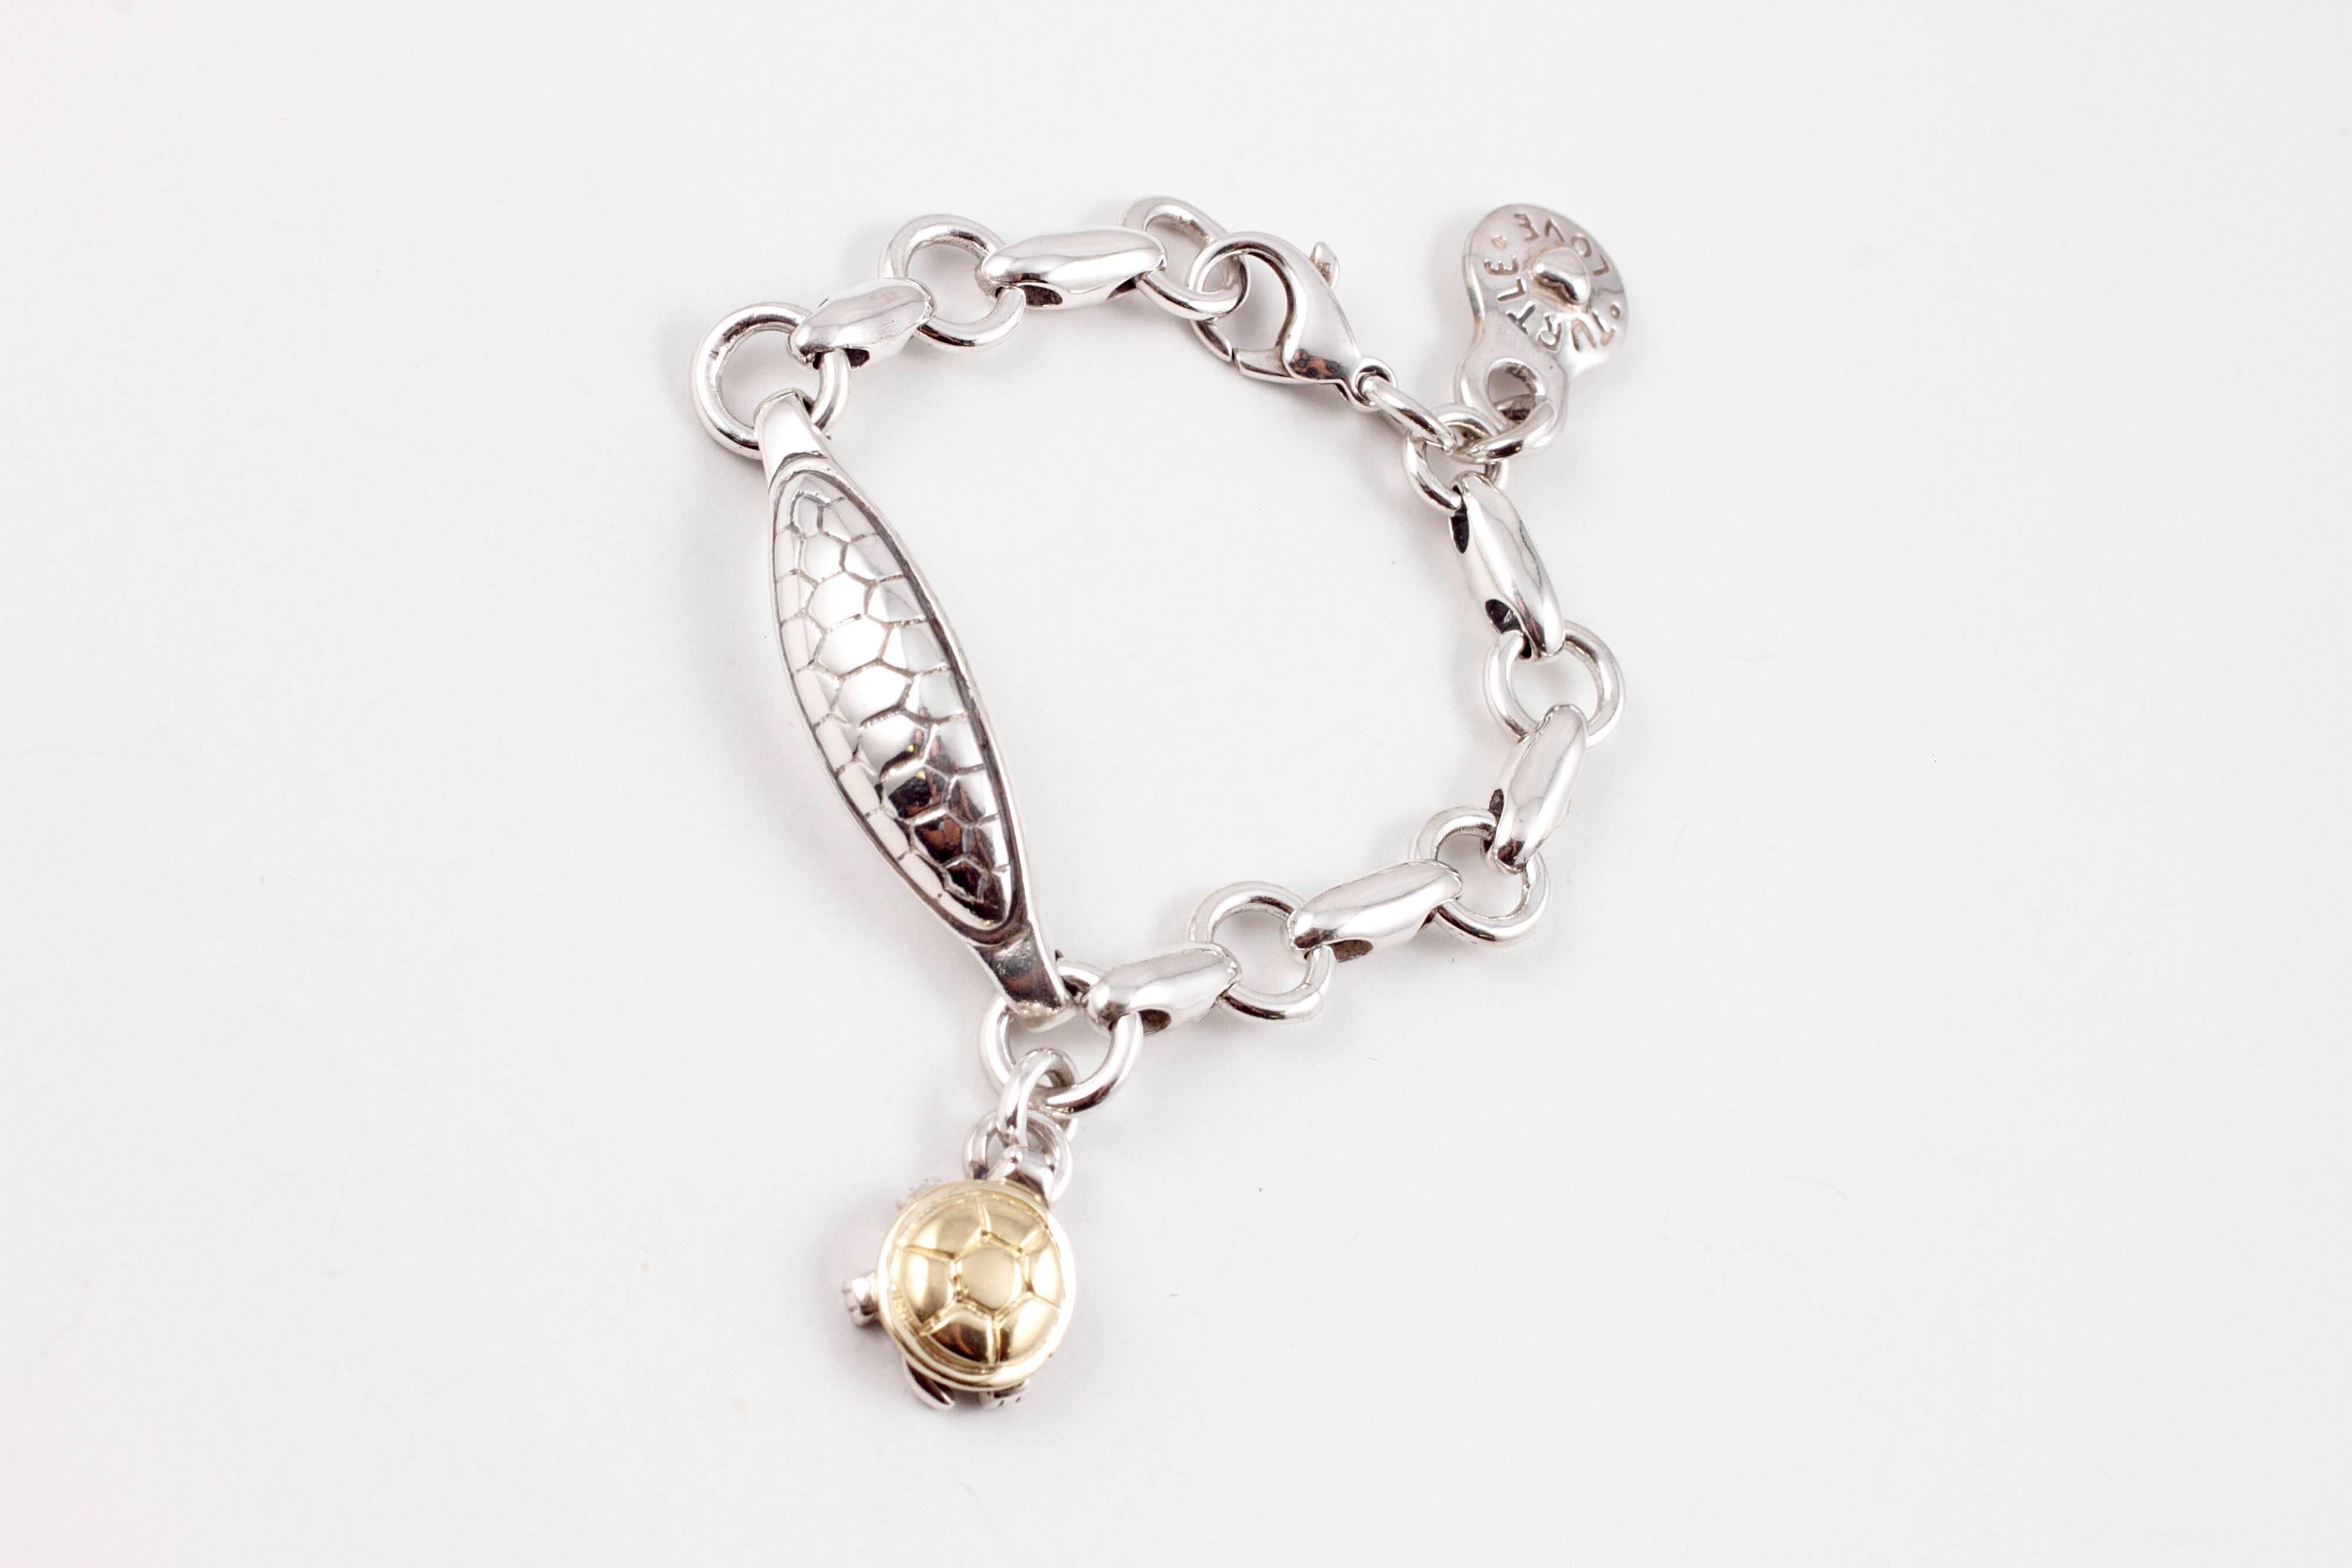 How fun is this 7 inch sterling silver ID bracelet by Sarah Jane for Saint?  Especially if you are a fan of turtles?  Great for any age!